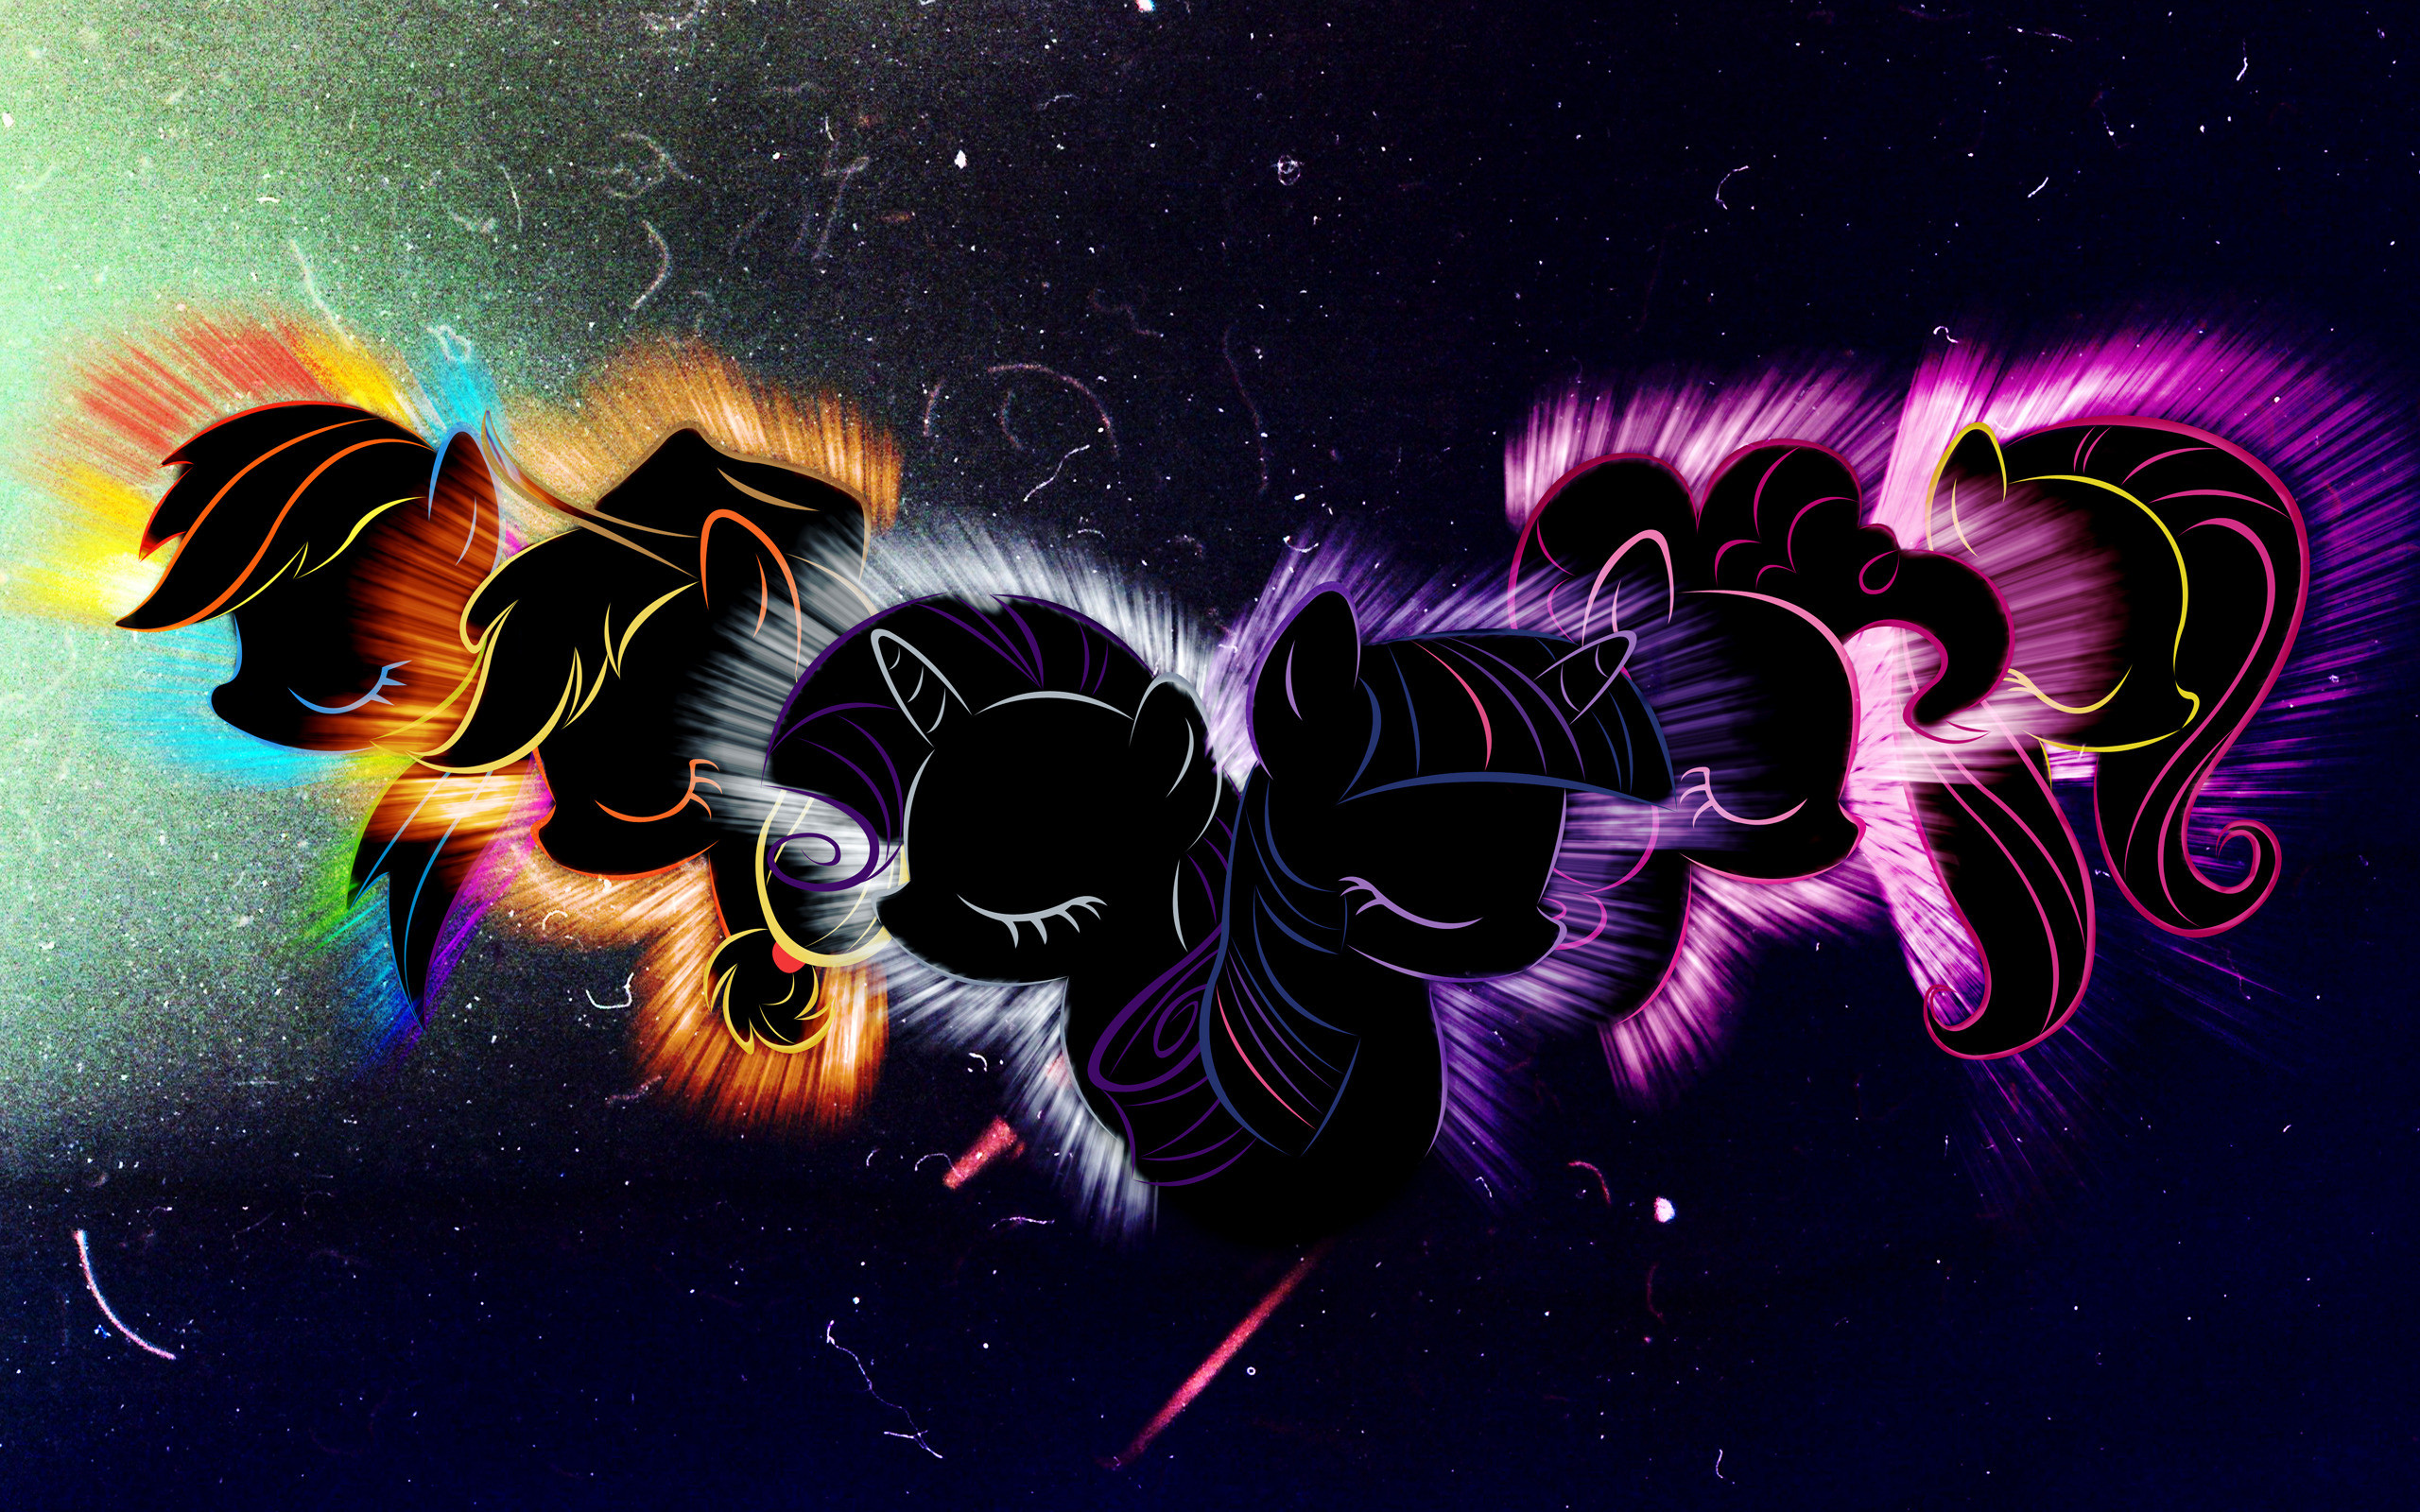 2560x1600 Pony Wallpapers - My Little Pony Friendship is Magic Wallpaper .